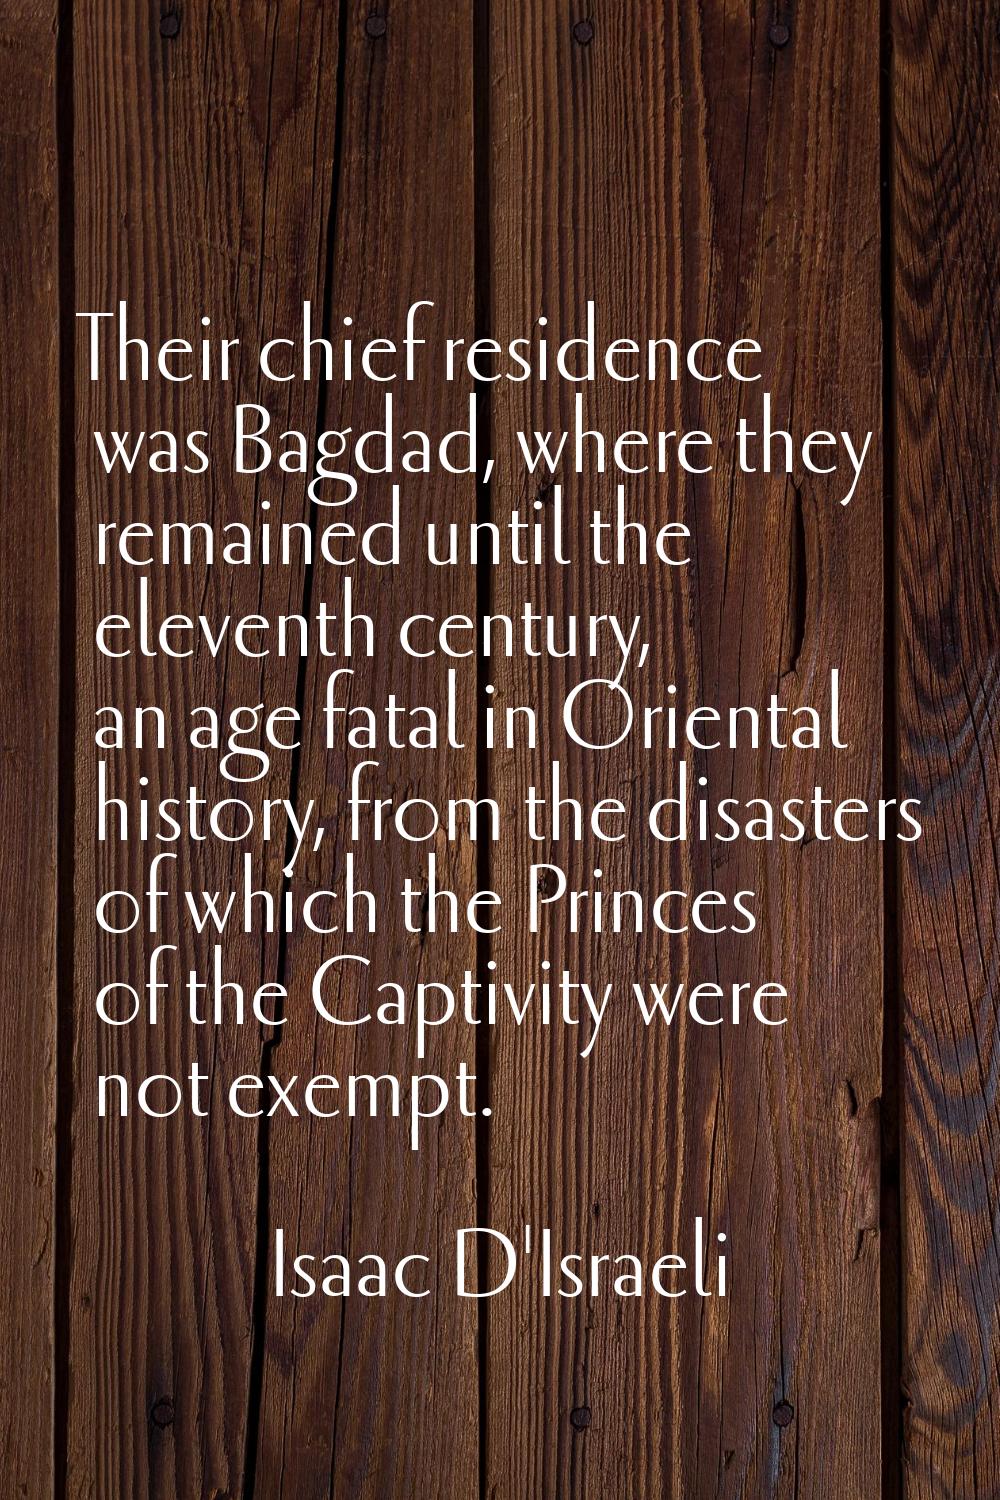 Their chief residence was Bagdad, where they remained until the eleventh century, an age fatal in O